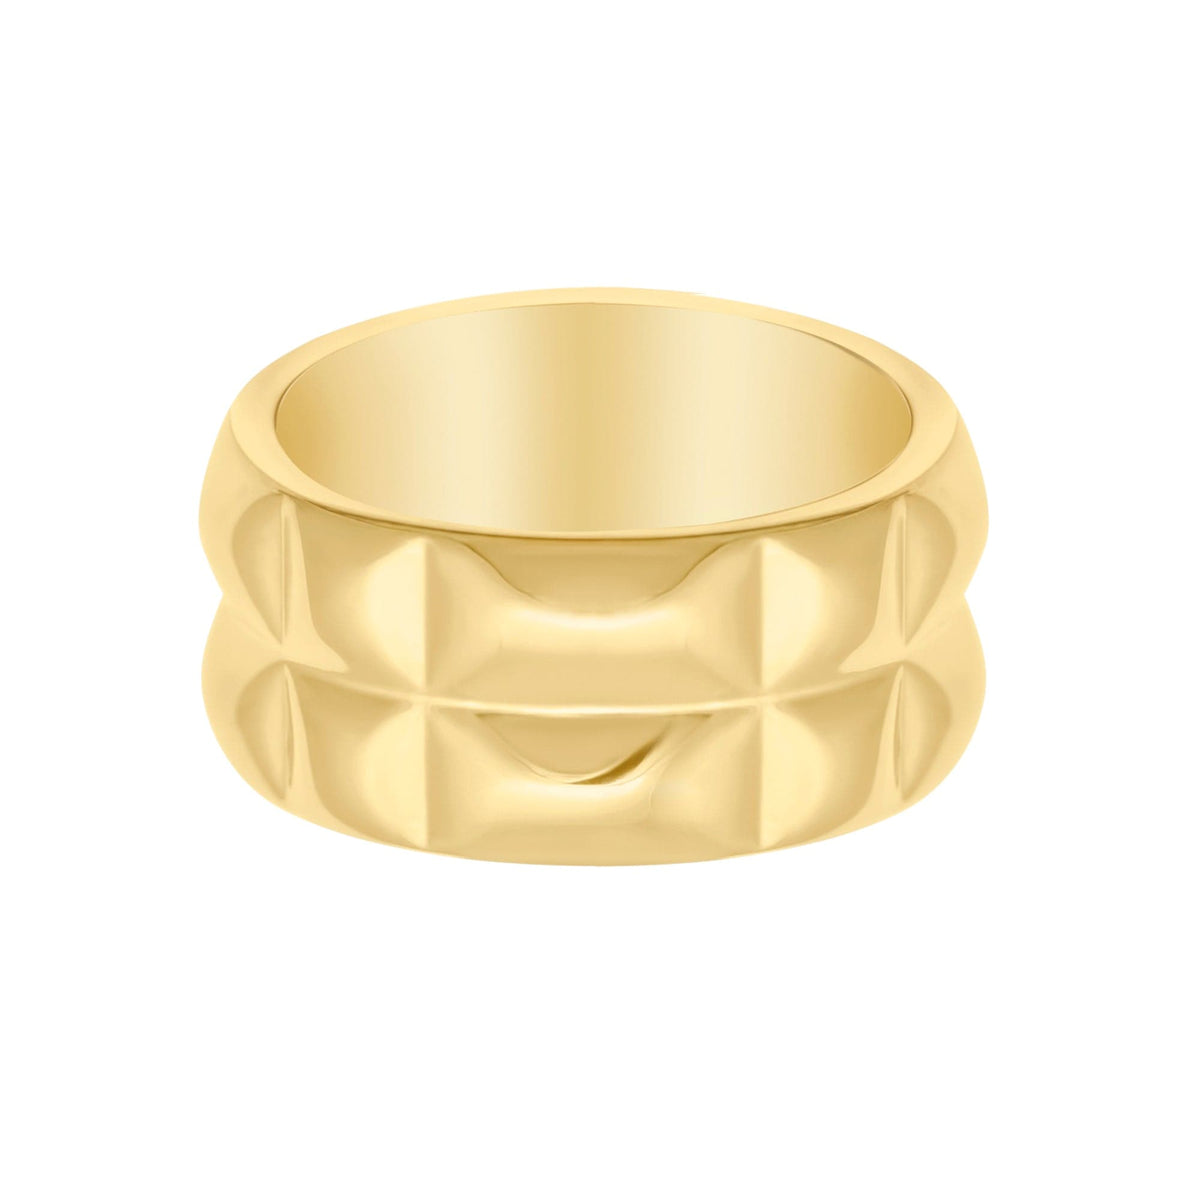 BohoMoon Stainless Steel Gretchen Ring Gold / US 6 / UK L / EUR 51 (small)